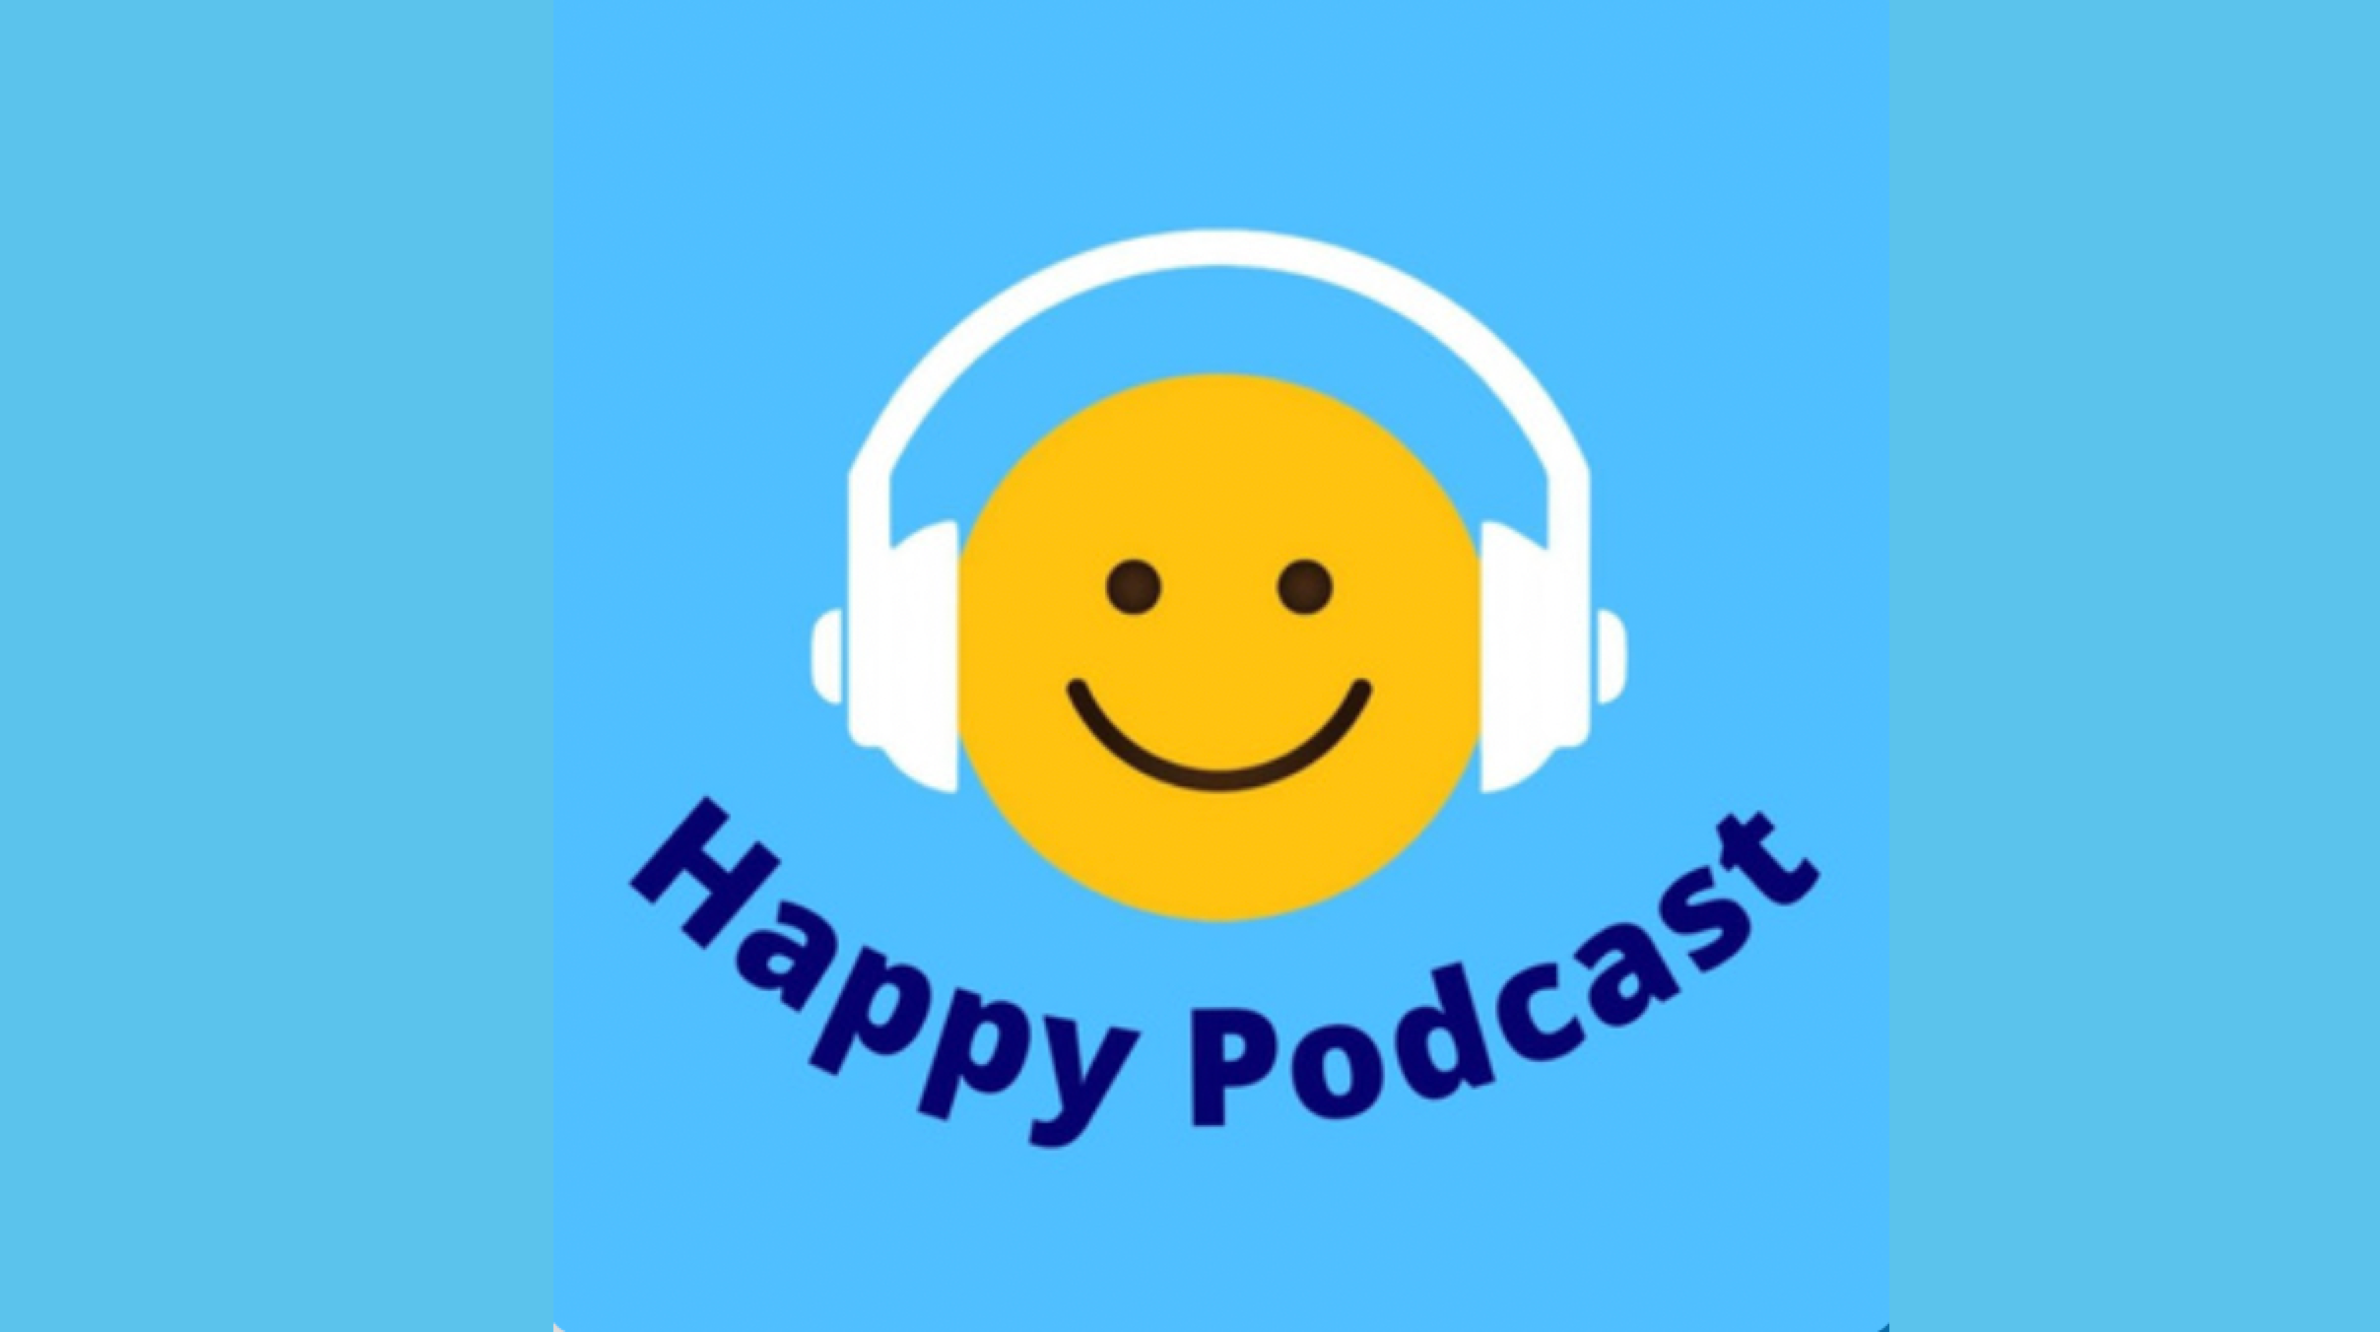 Happy Podcast with Sonia Hunt